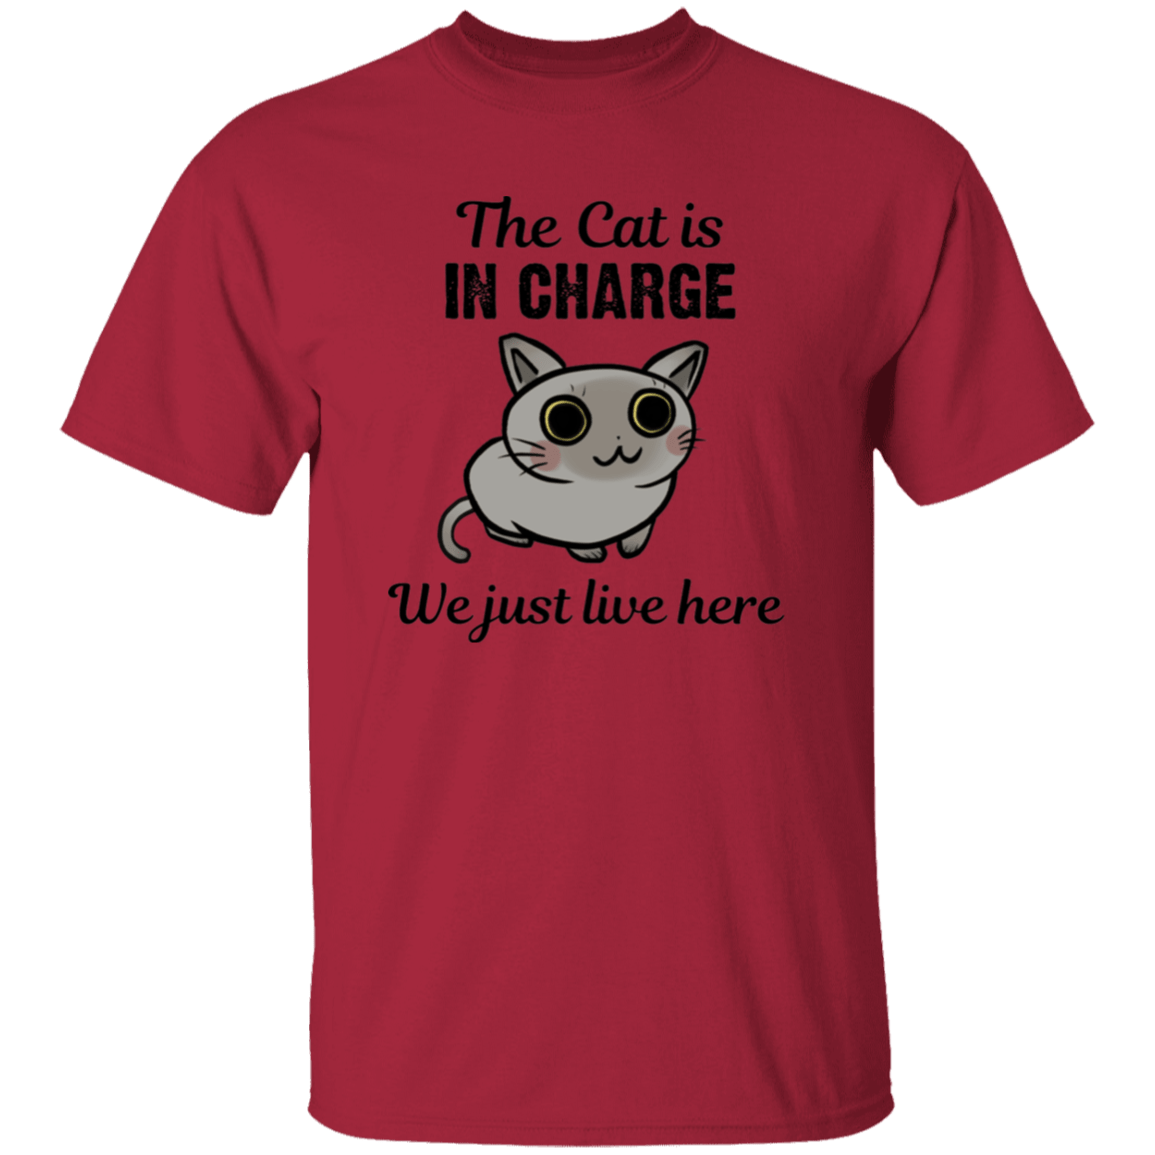 The Cat is in Charge - Youth T-Shirt.